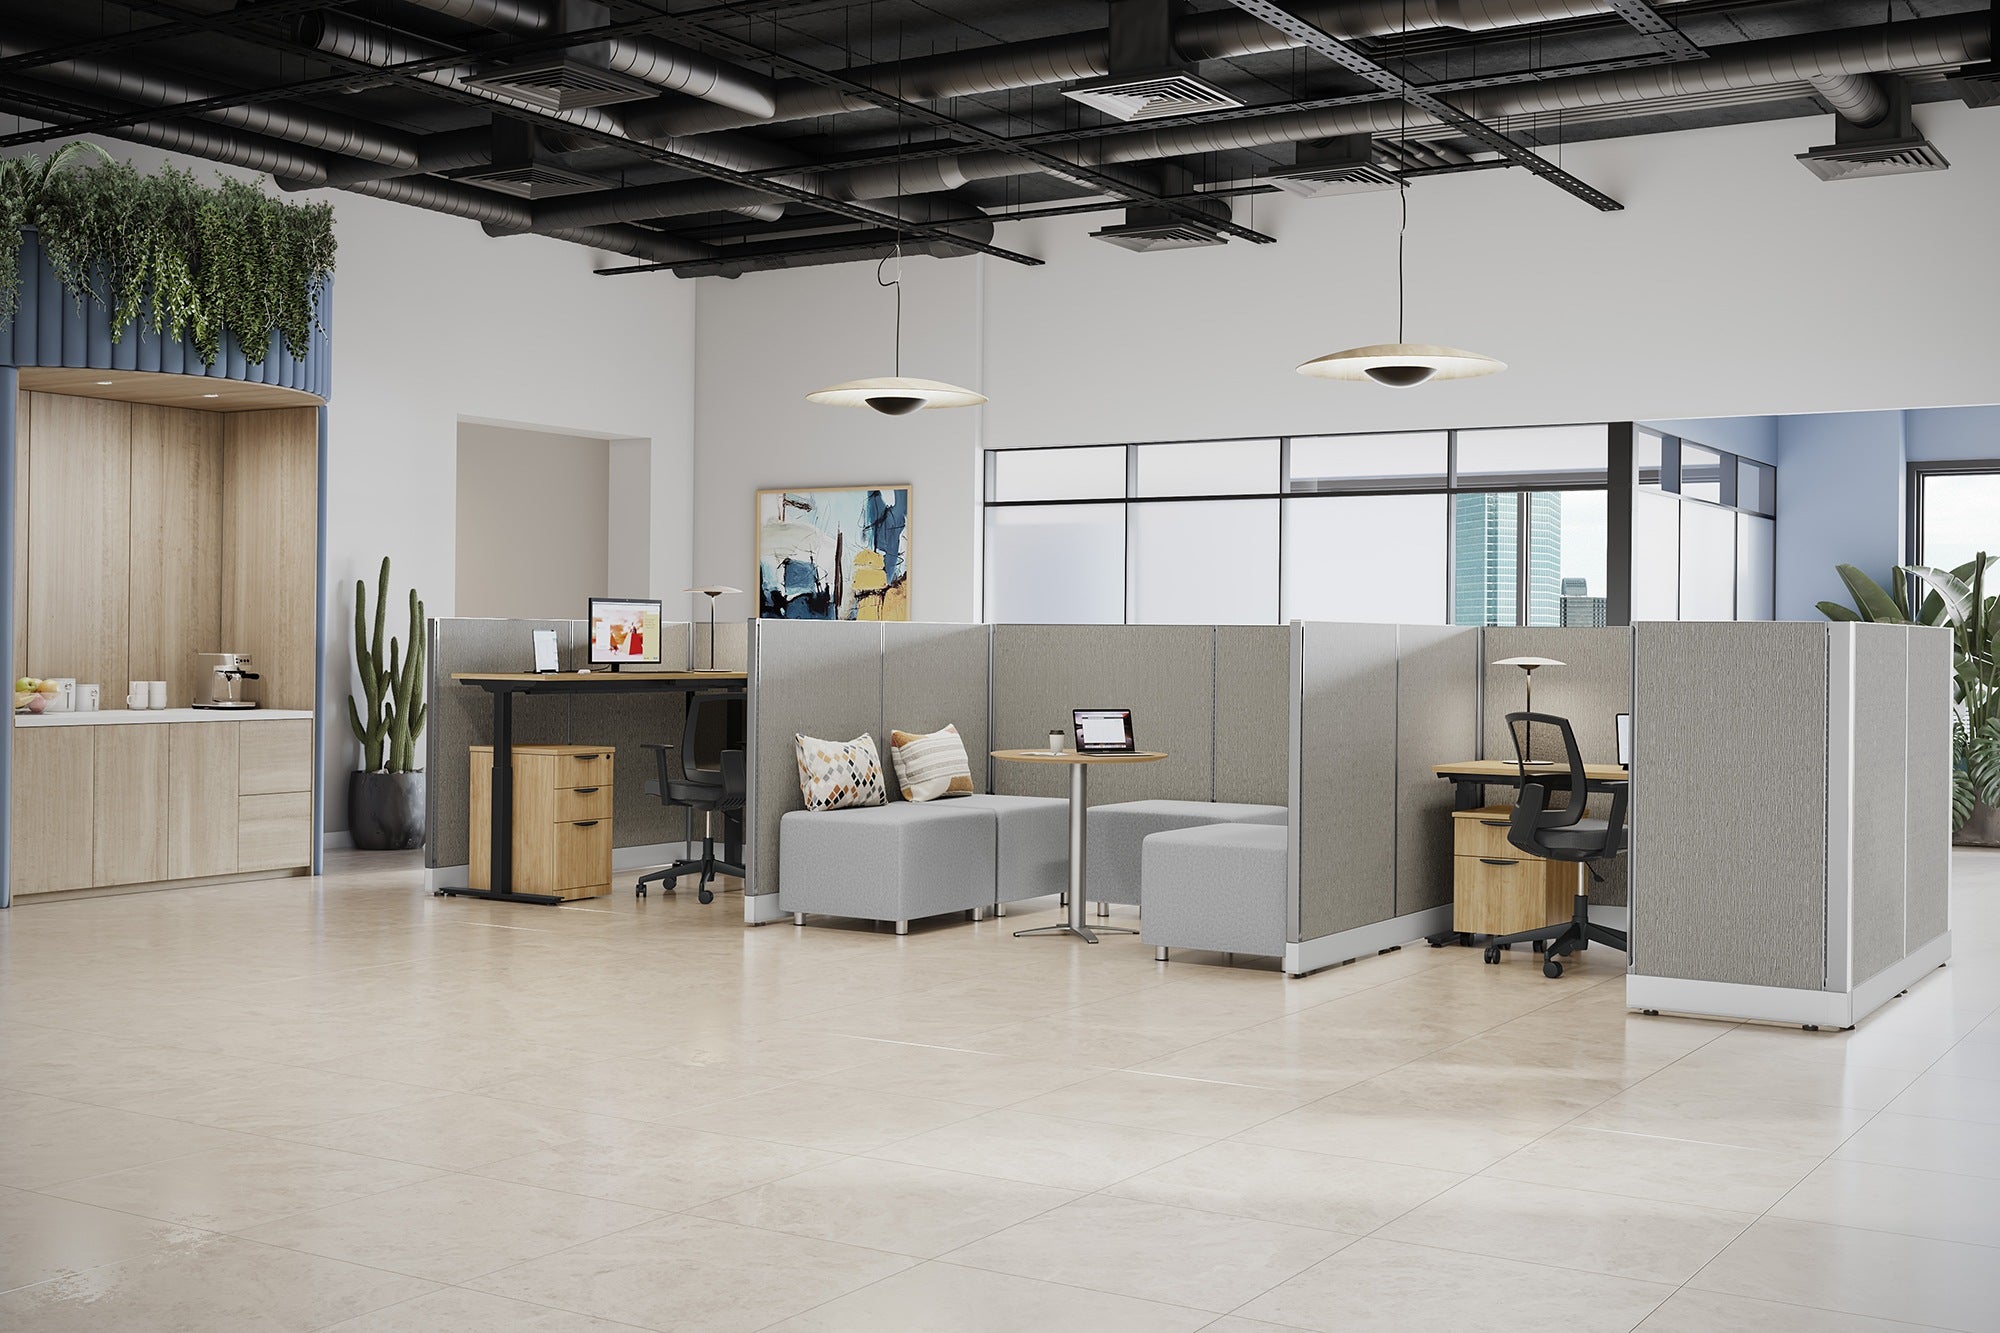 Coworking furniture with panels and adjustable height desks.